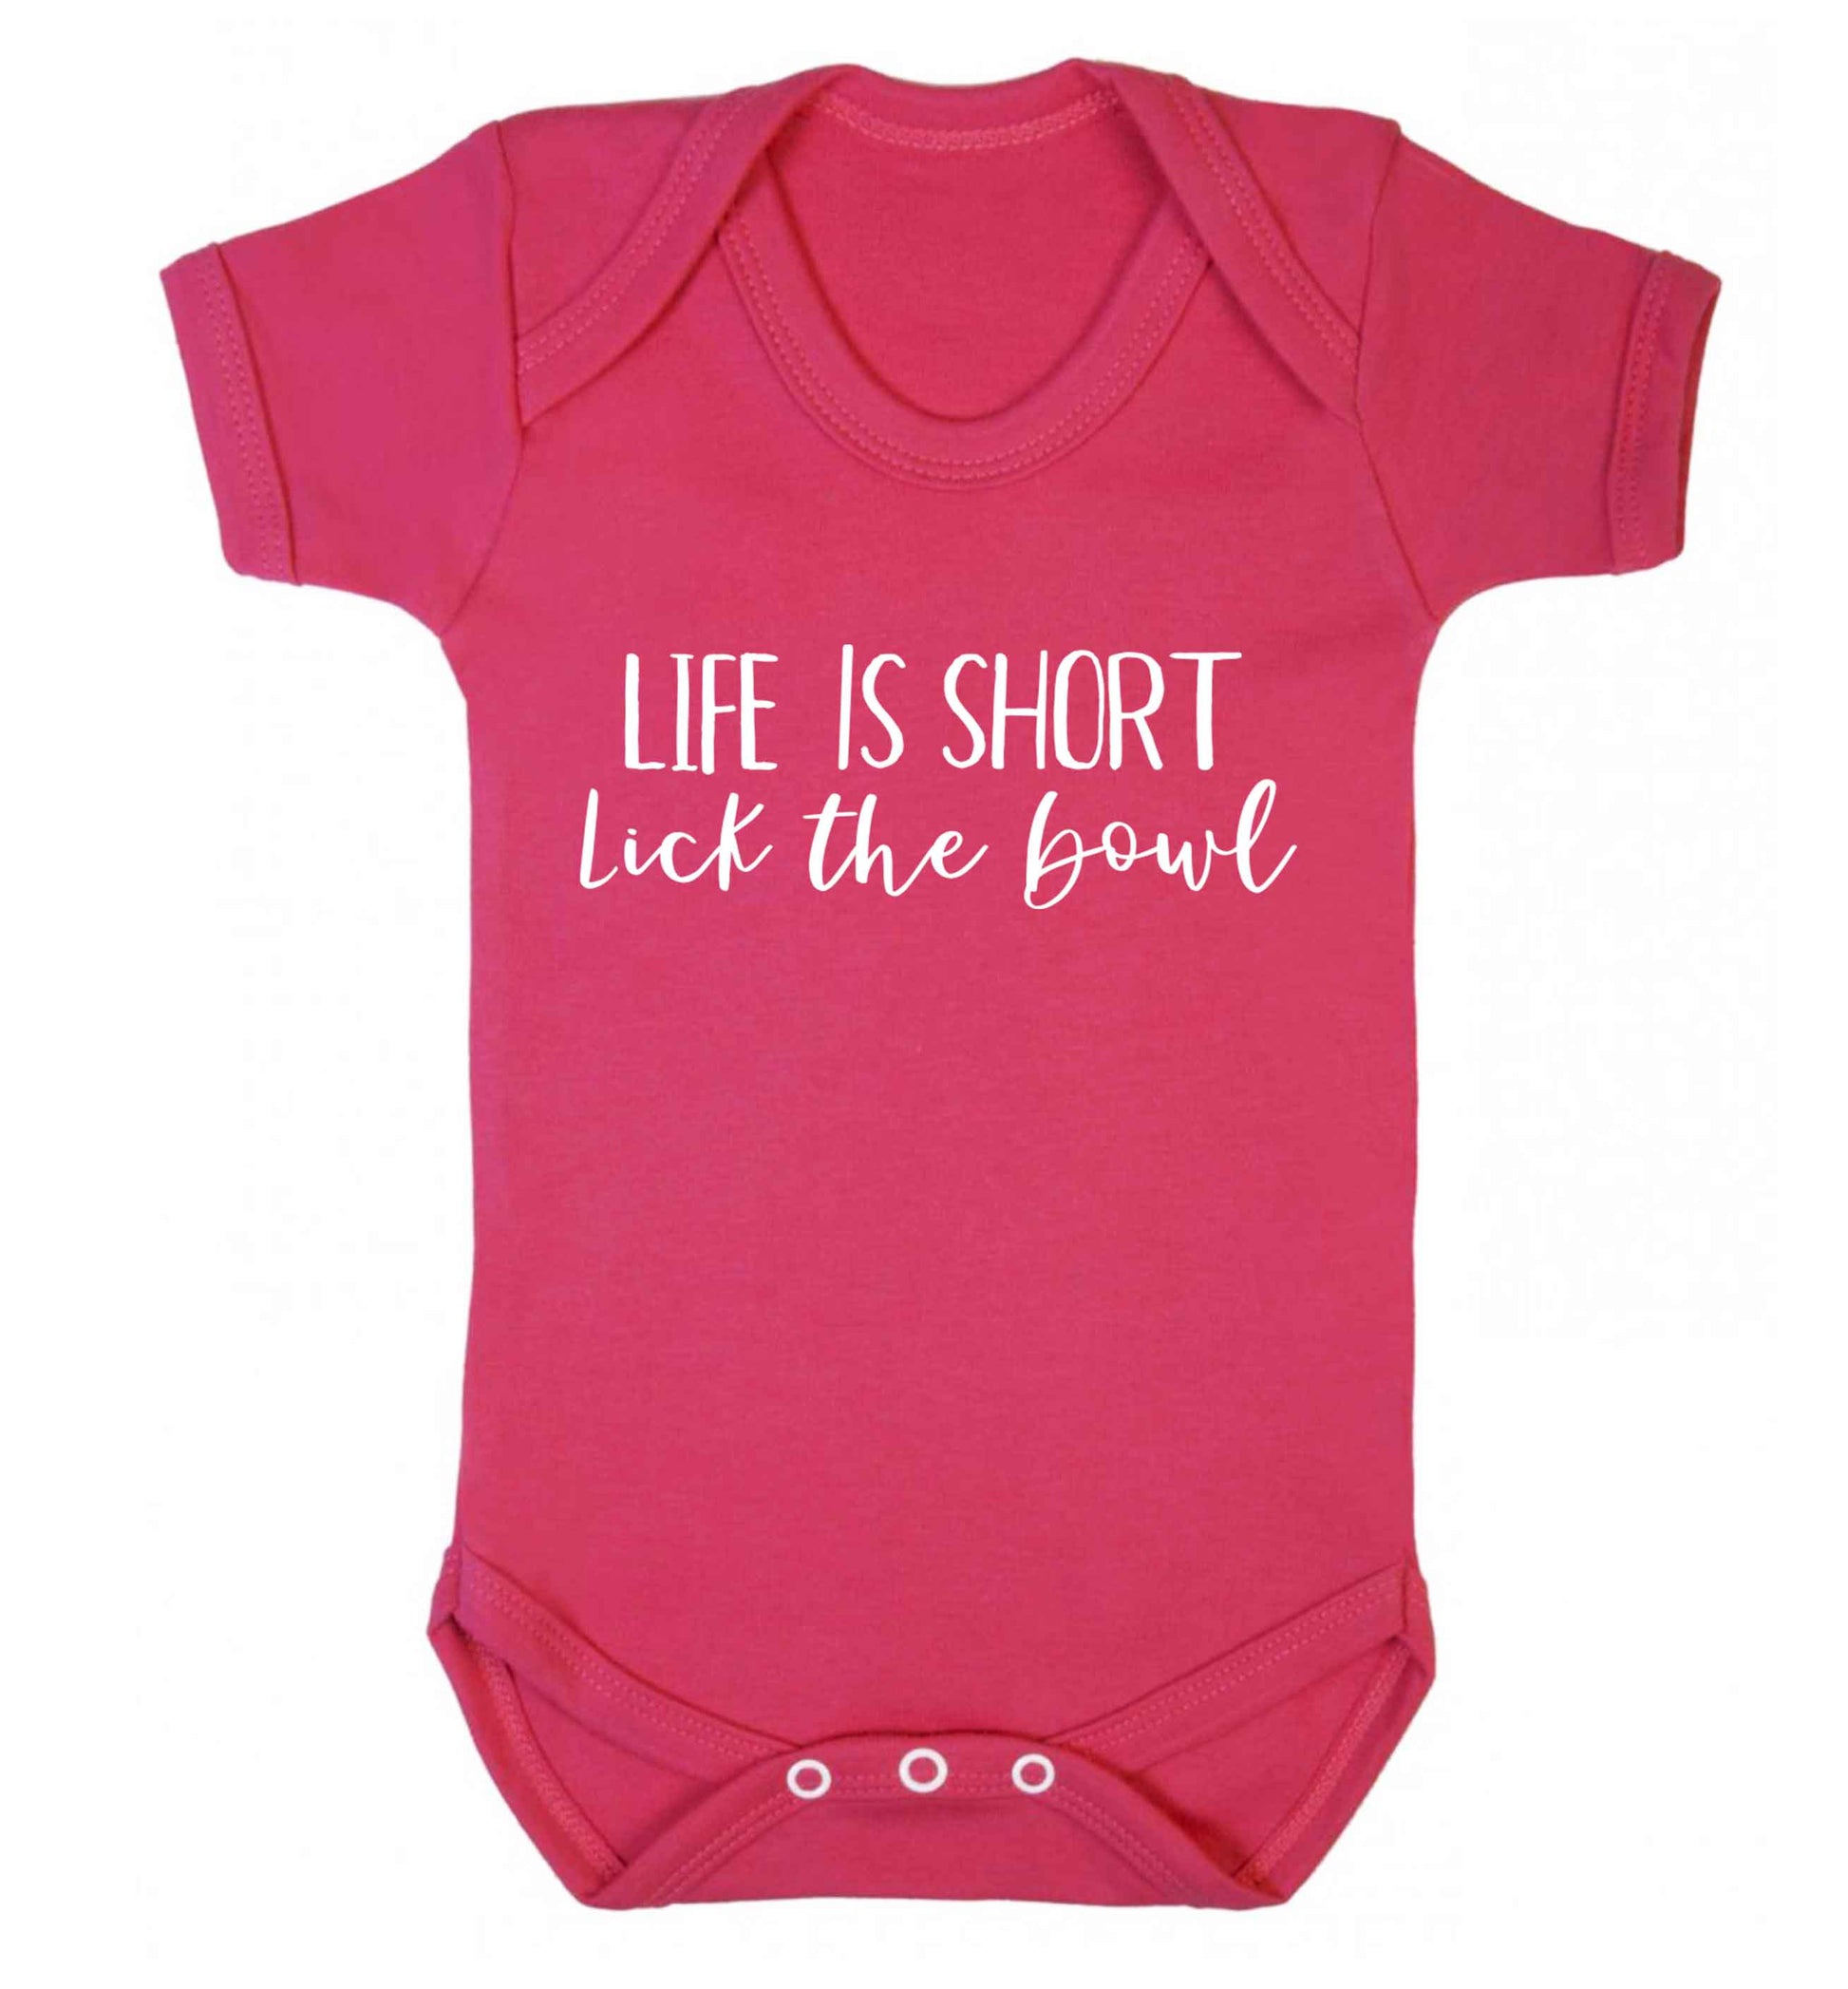 Life is short lick the bowl Baby Vest dark pink 18-24 months